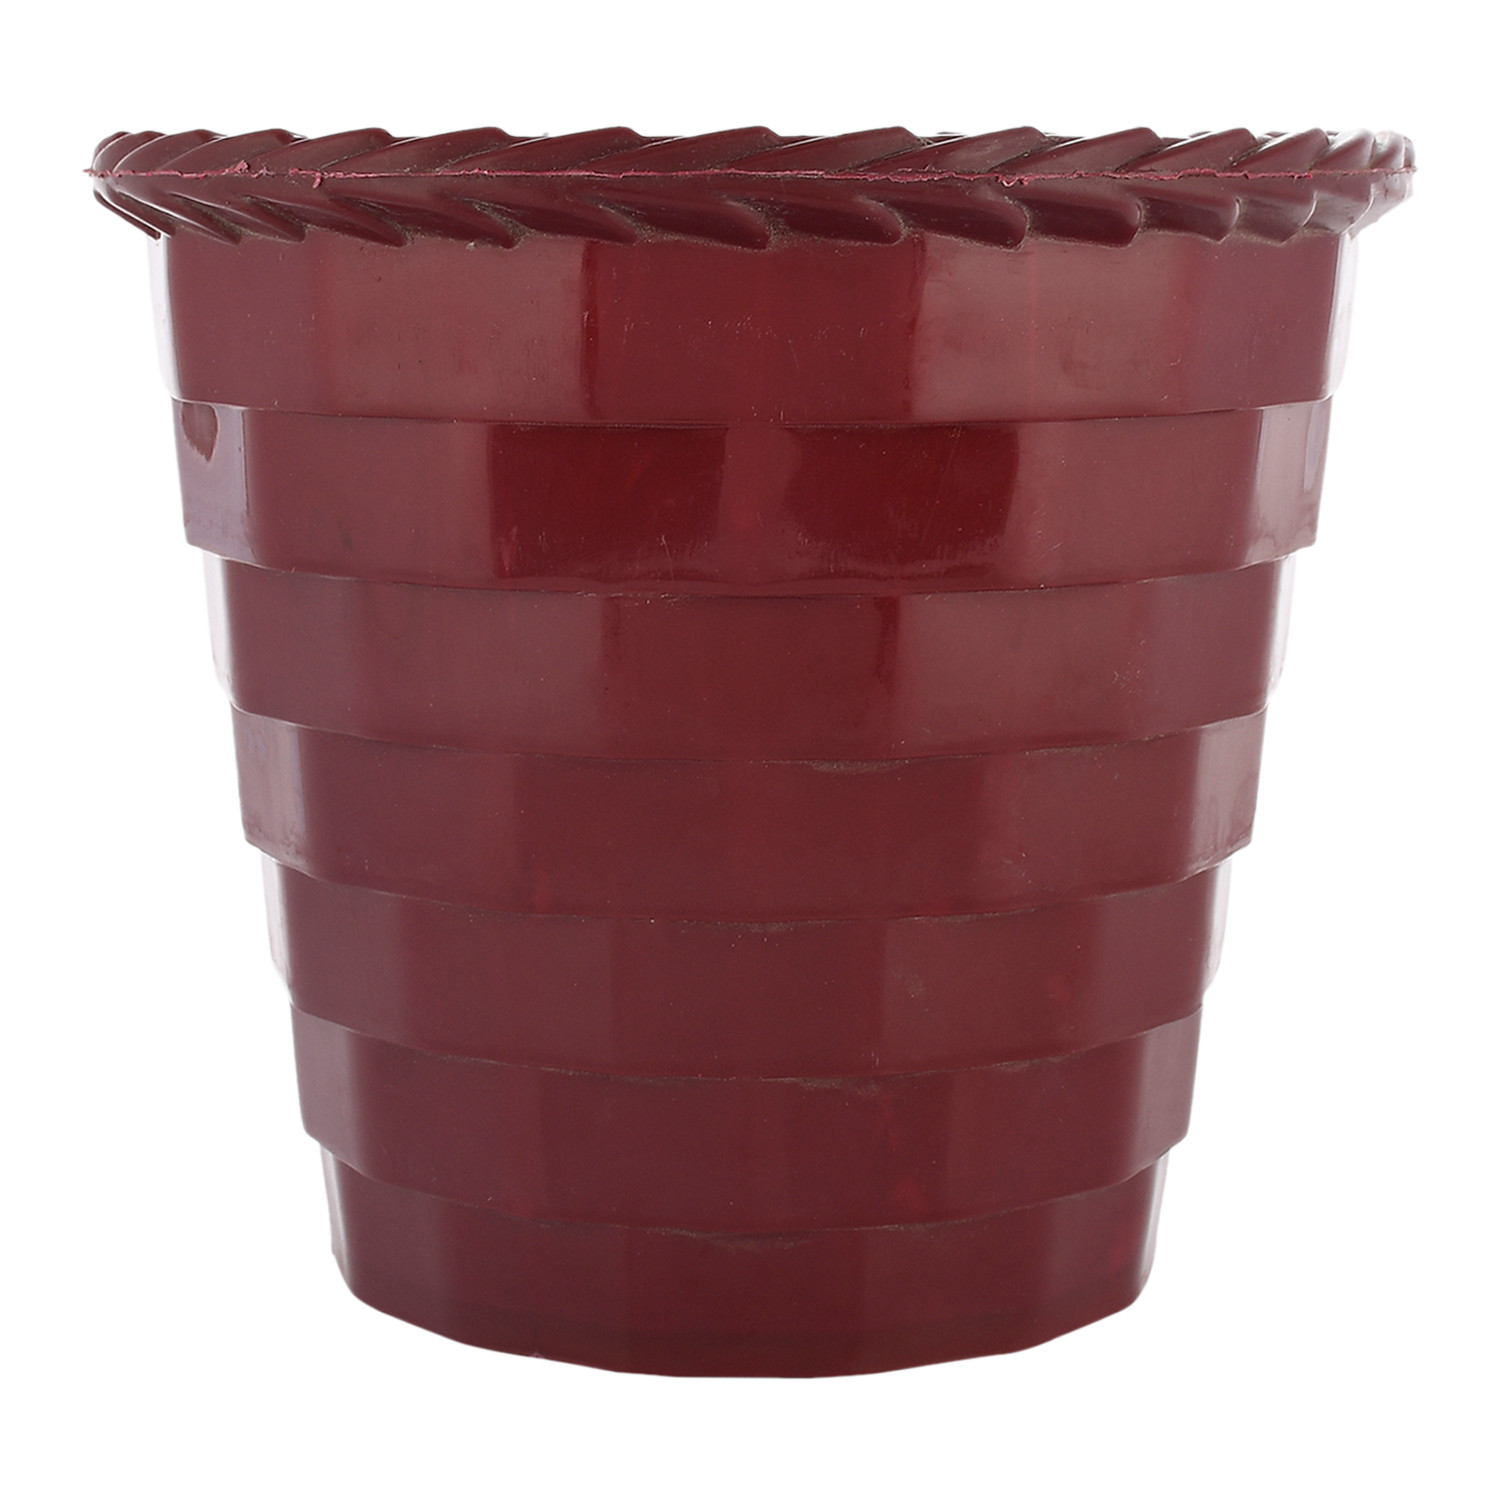 Kuber Industries Brick Flower Pot|Durable Plastic Flower Pots|Planters for Home Décor|Garden|Living Room|Balcony|6 Inch|Pack of 2 (Maroon & Grey)